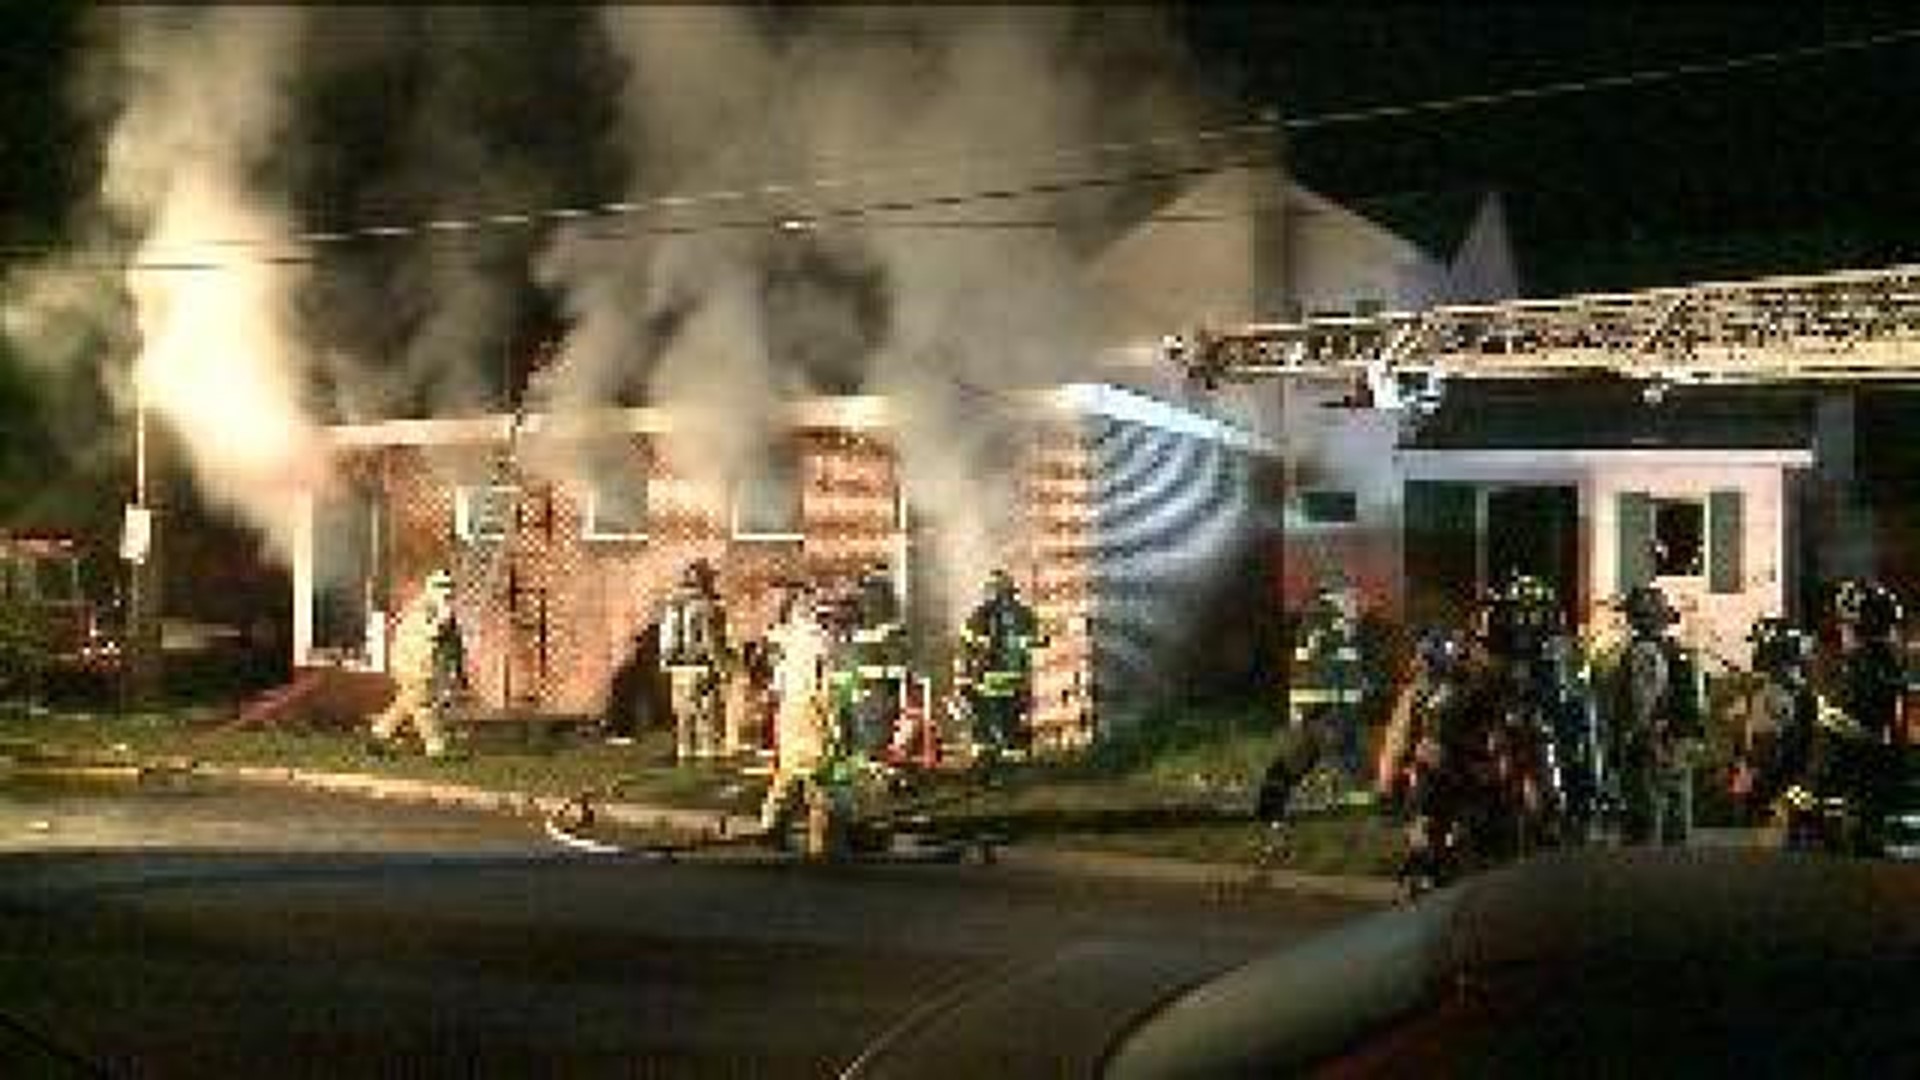 Smokey Fire Damages Vacant House, Storefront